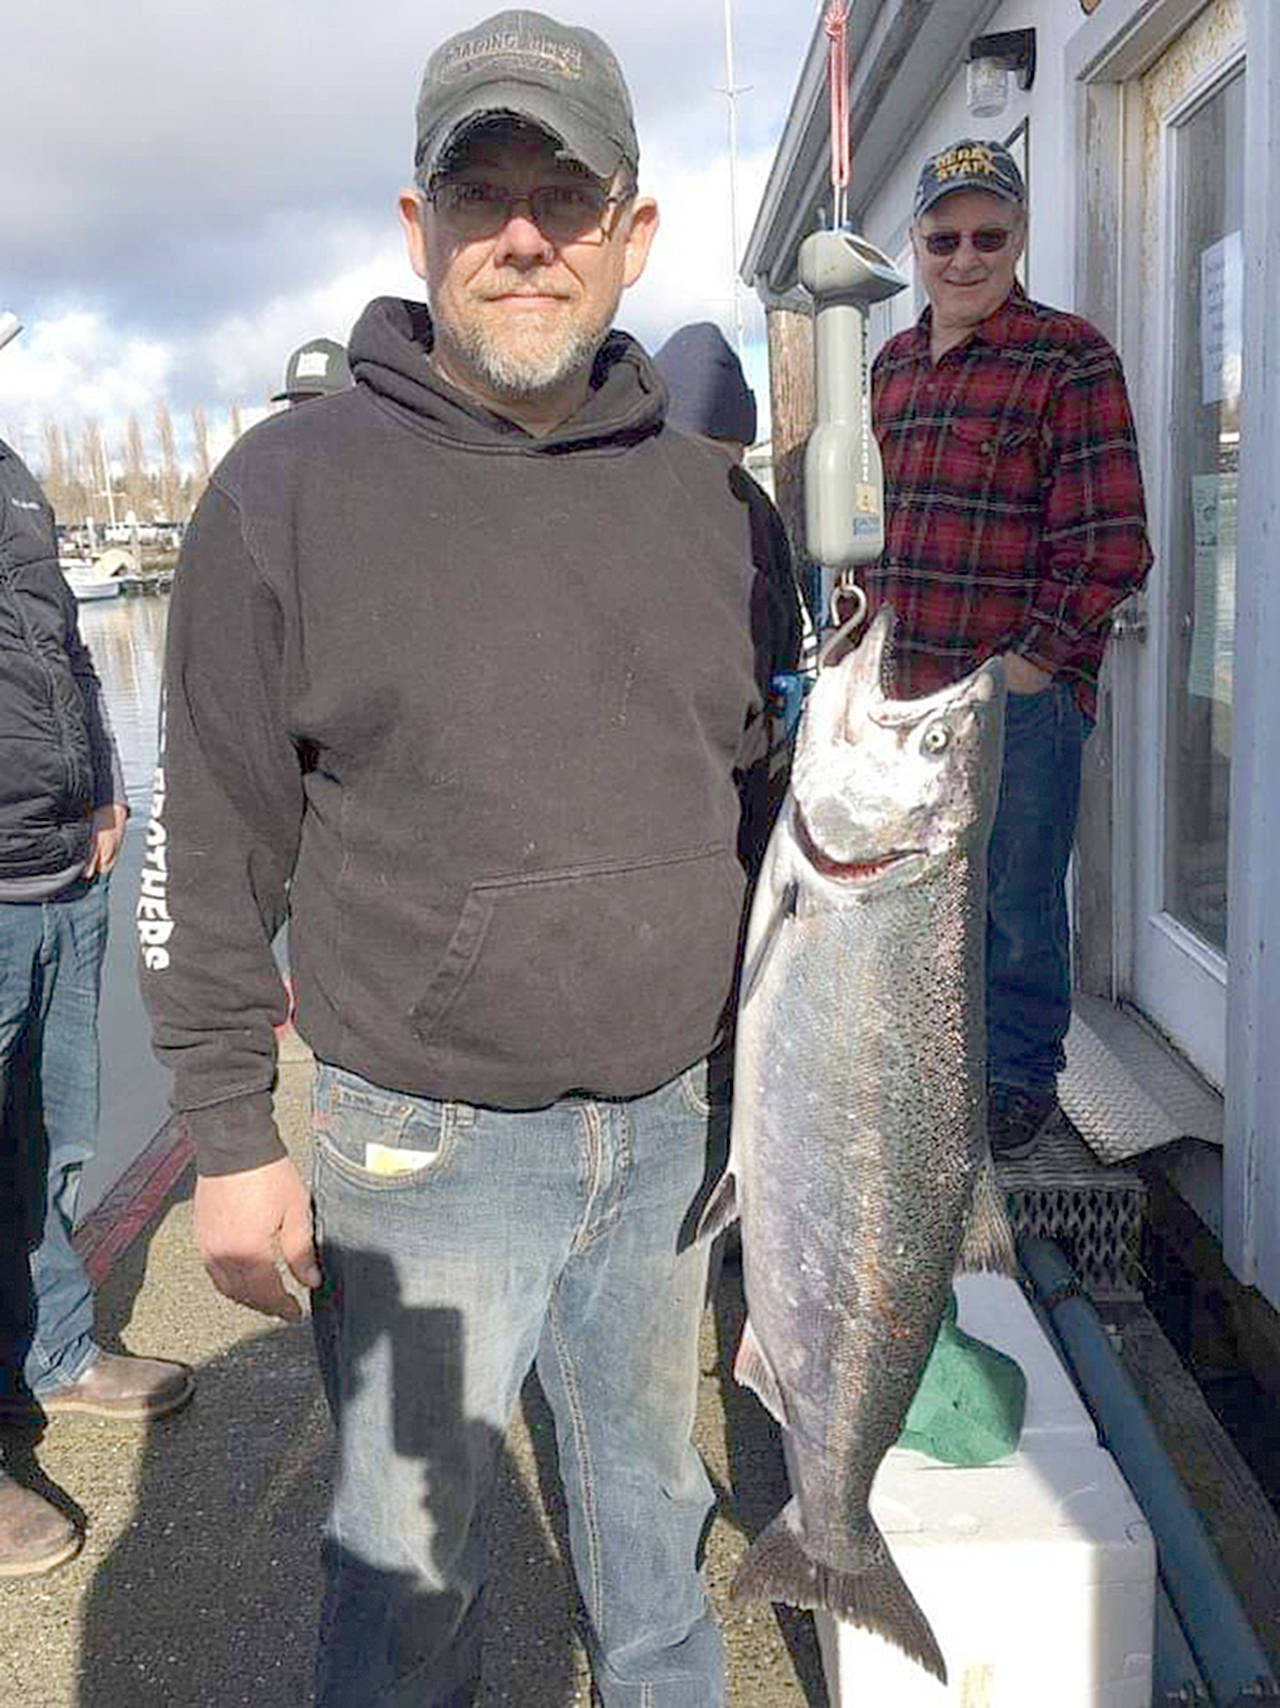 Olympic Peninsula Salmon Derby Clinton angler Mark Thompson weighed in this 19.35-pound blackmouth chinook on Friday, the opening day of the Olympic Peninsula Salmon Derby. Thompson’s fish is still atop the leaderboard entering today’s final day of fishing.